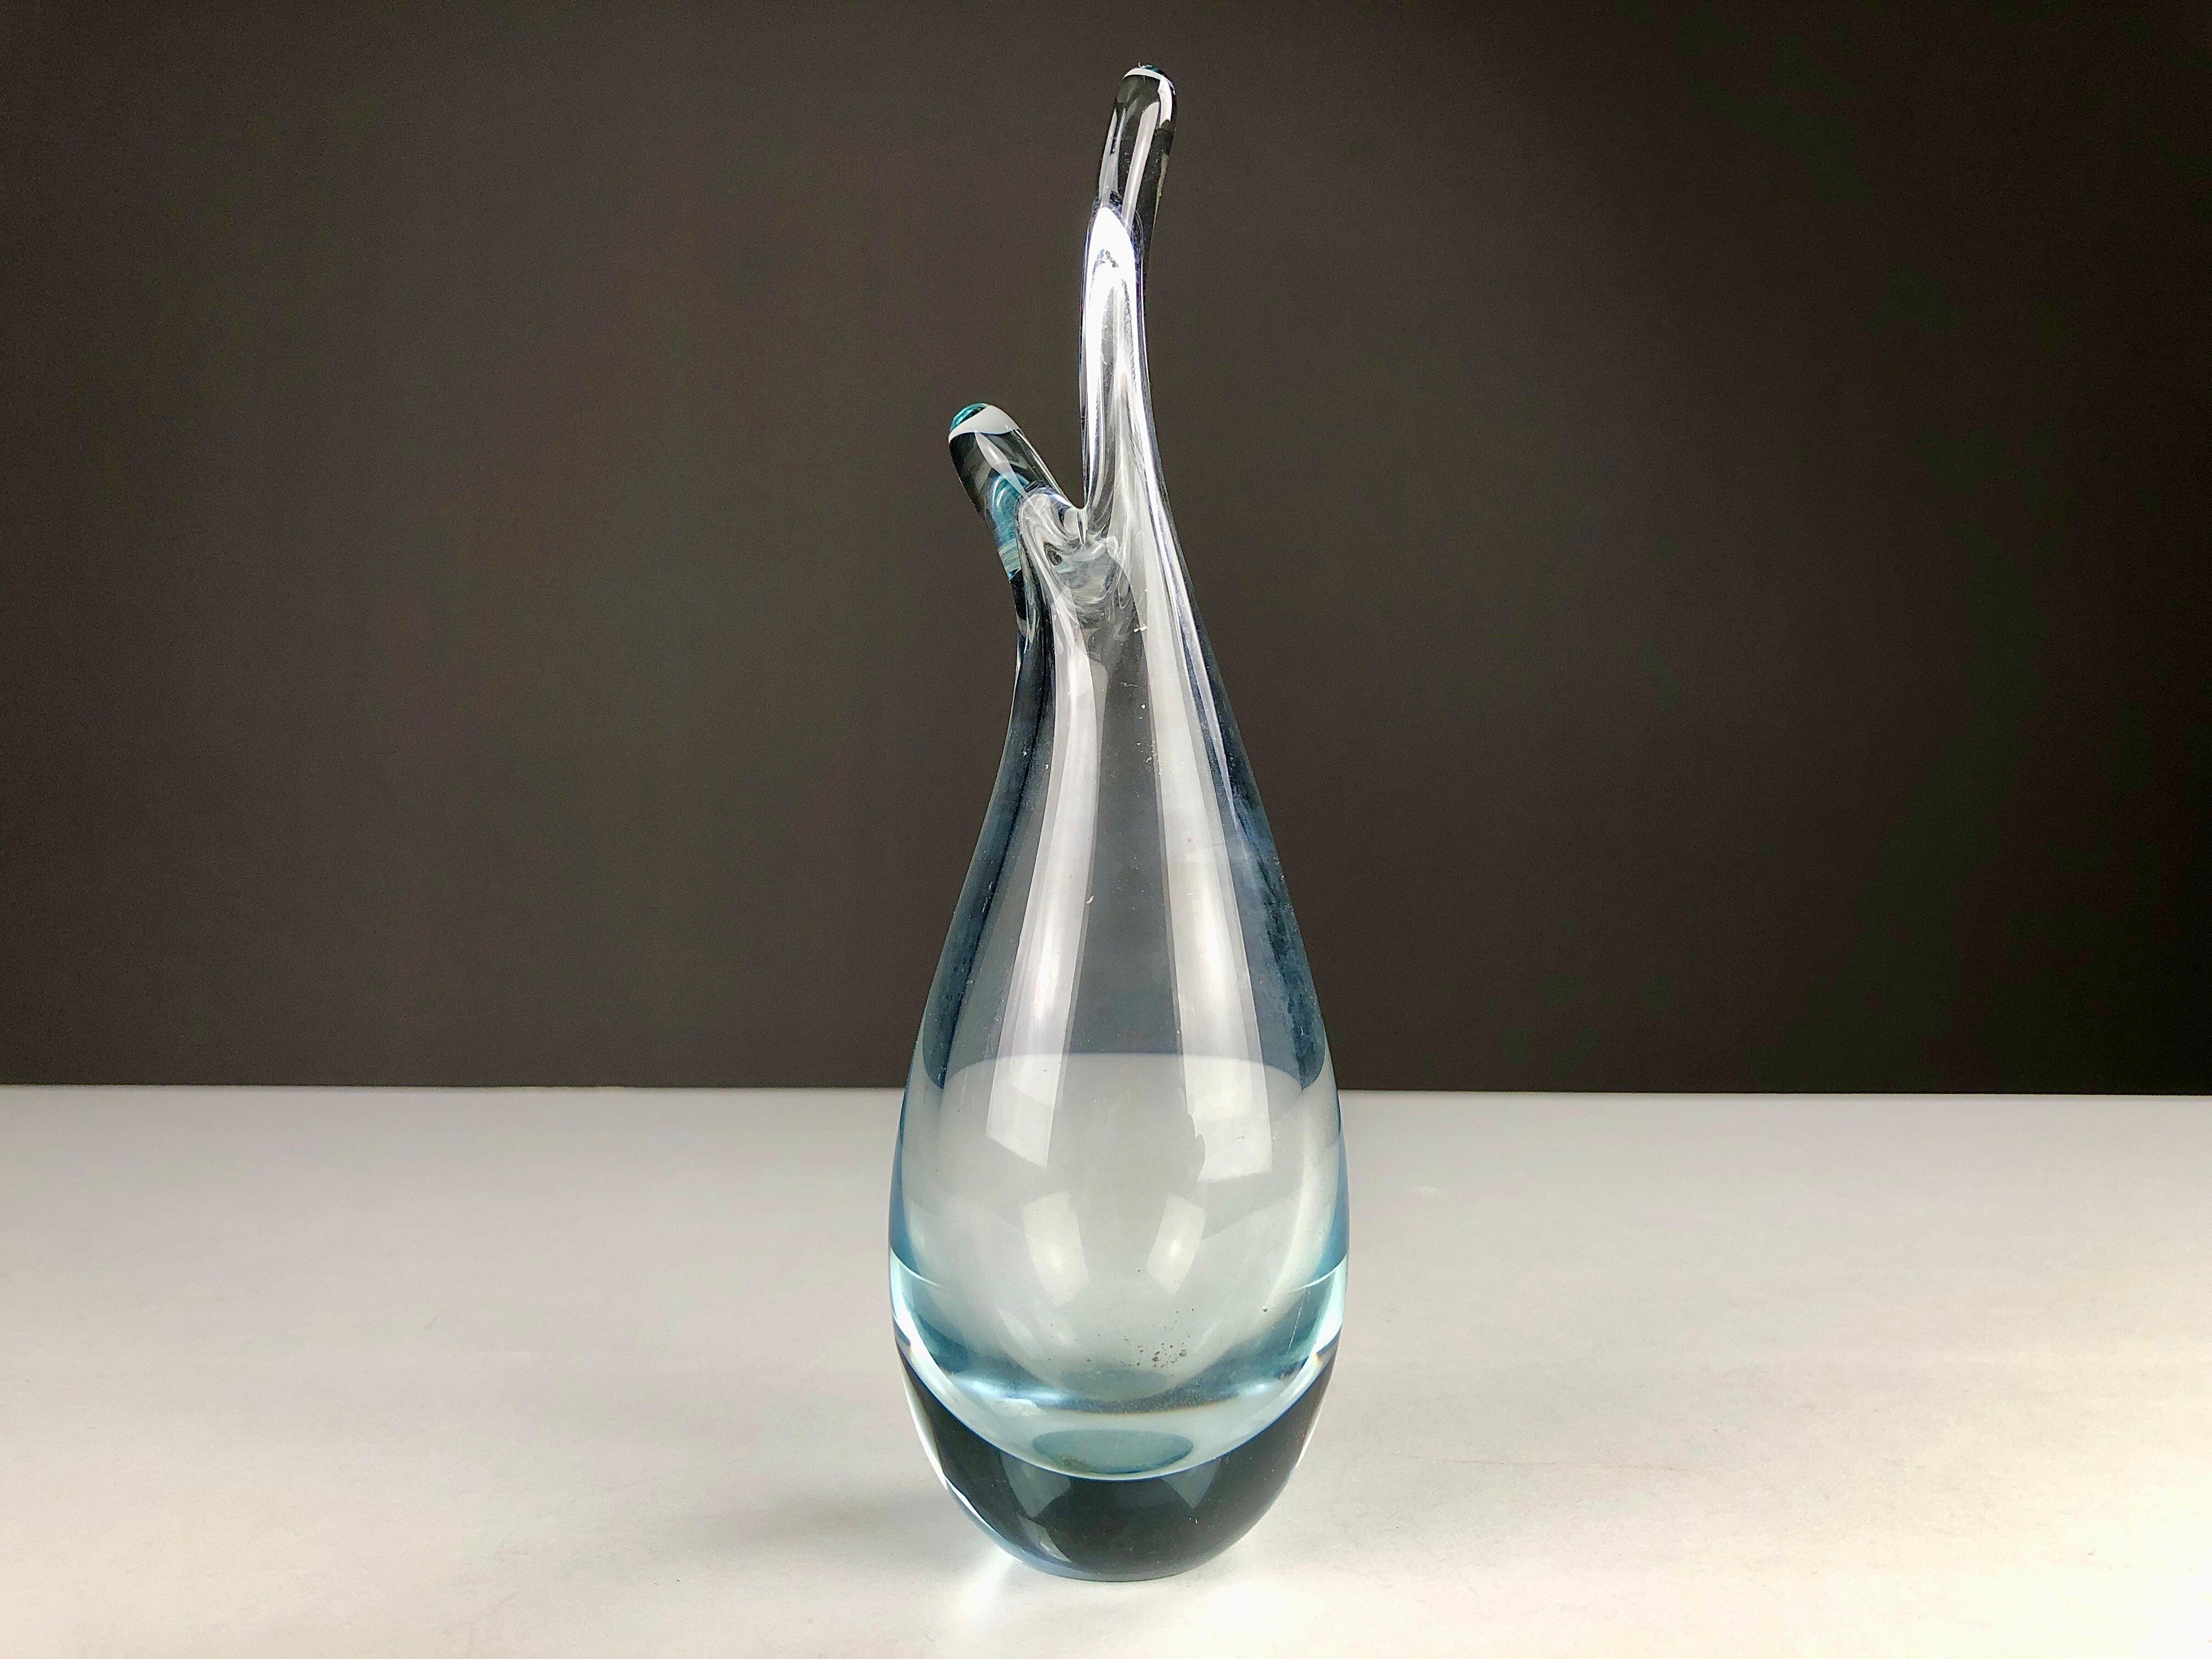 1950´s Danish handblown glass drop vase by Per Lütken for Holmegaard. 

The vase is ingraved with Per Lütkens signature, year of production (1958) and the Holmegaard name.

Danish glassmaker Per Lütken (1916 - 1998) worked at Holmegaard from 1942